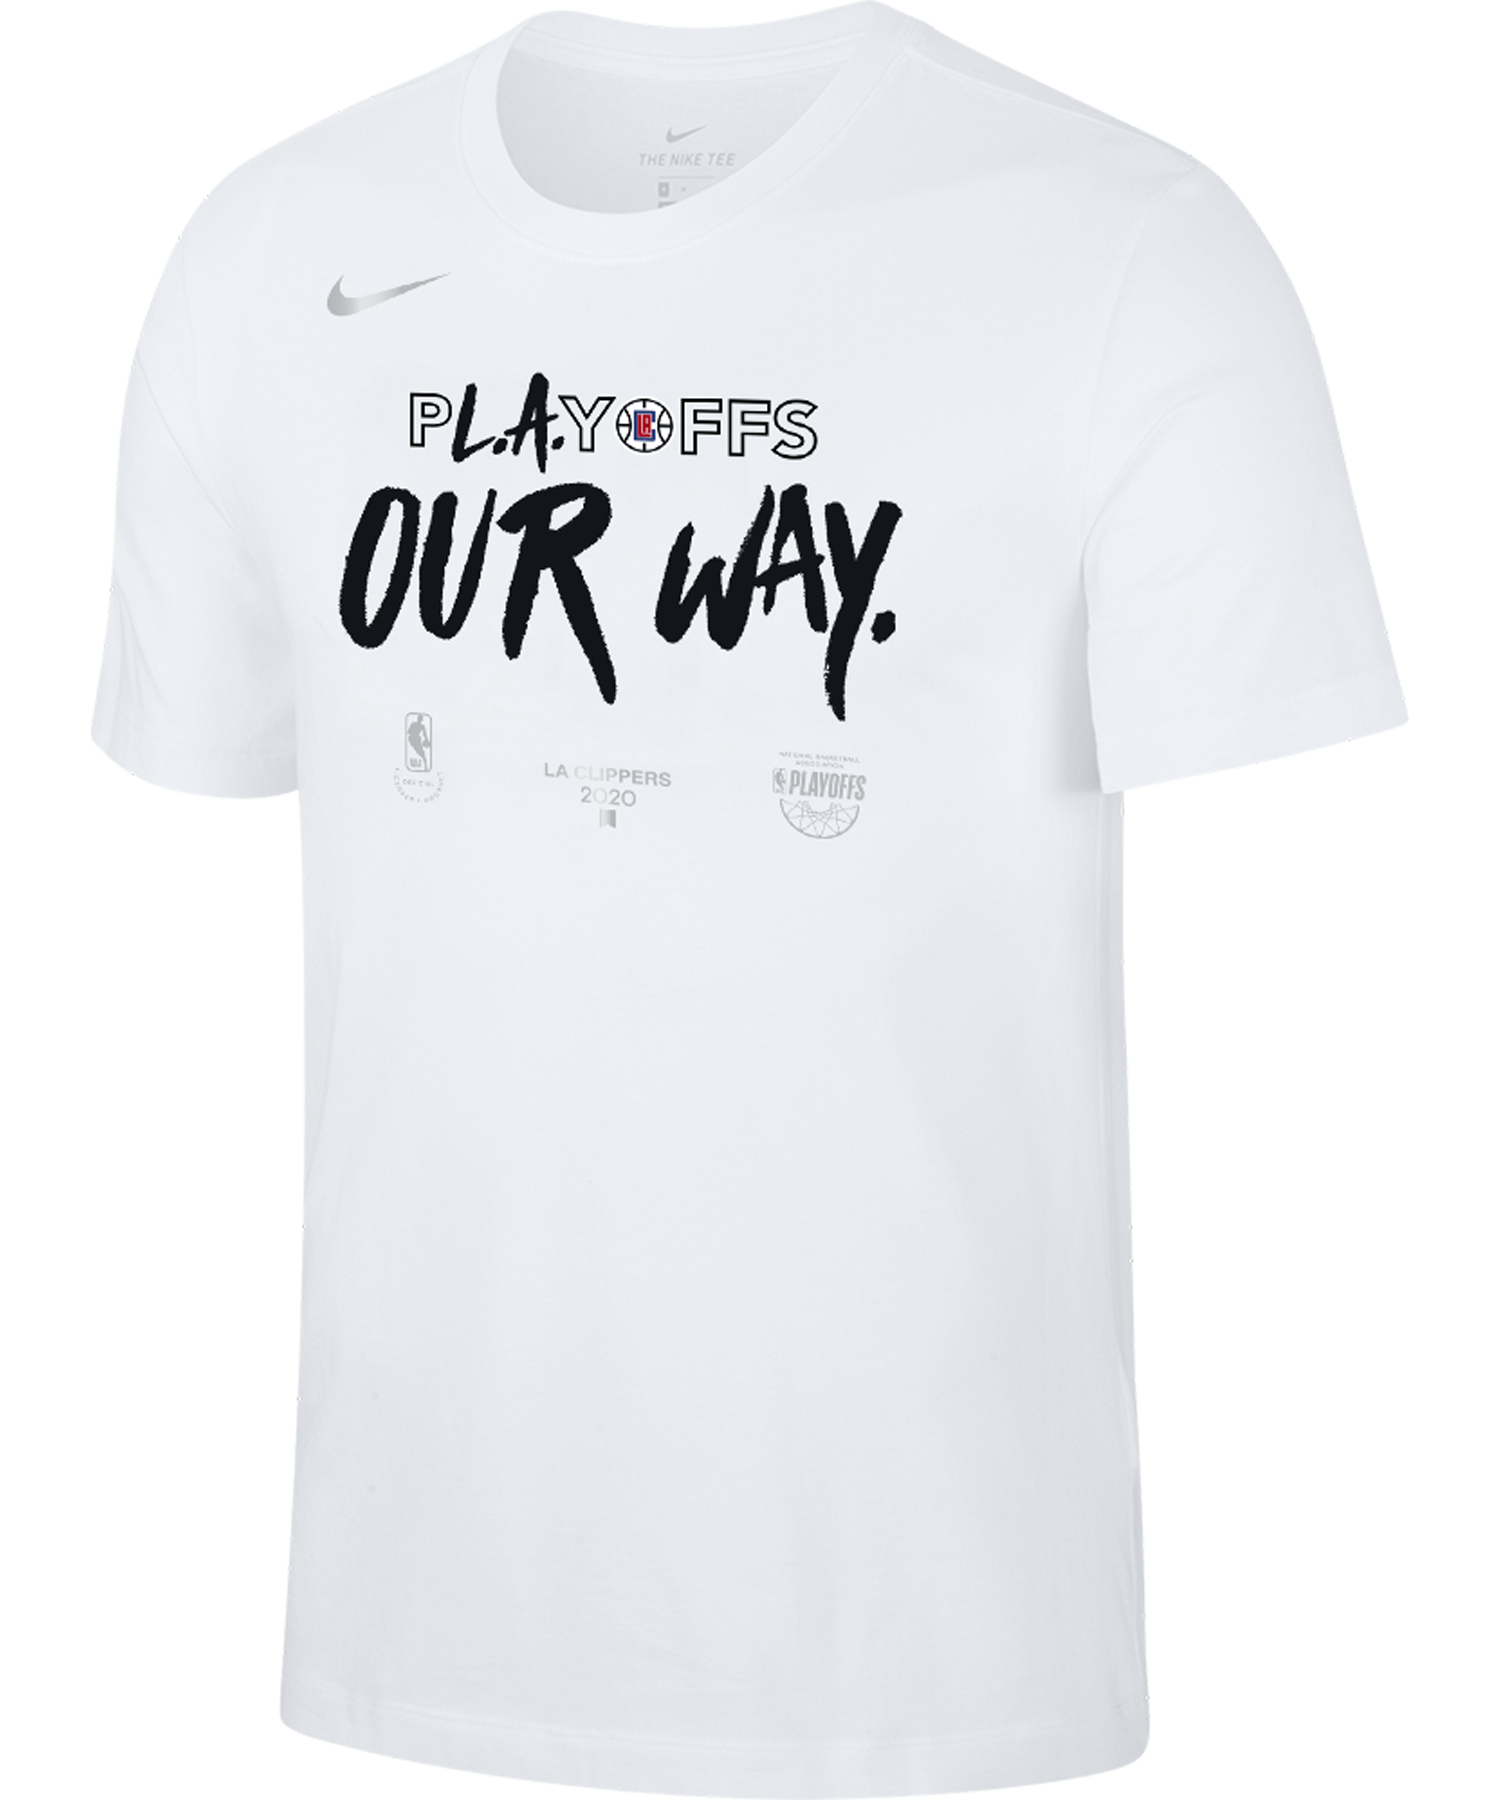 clippers t shirt nike